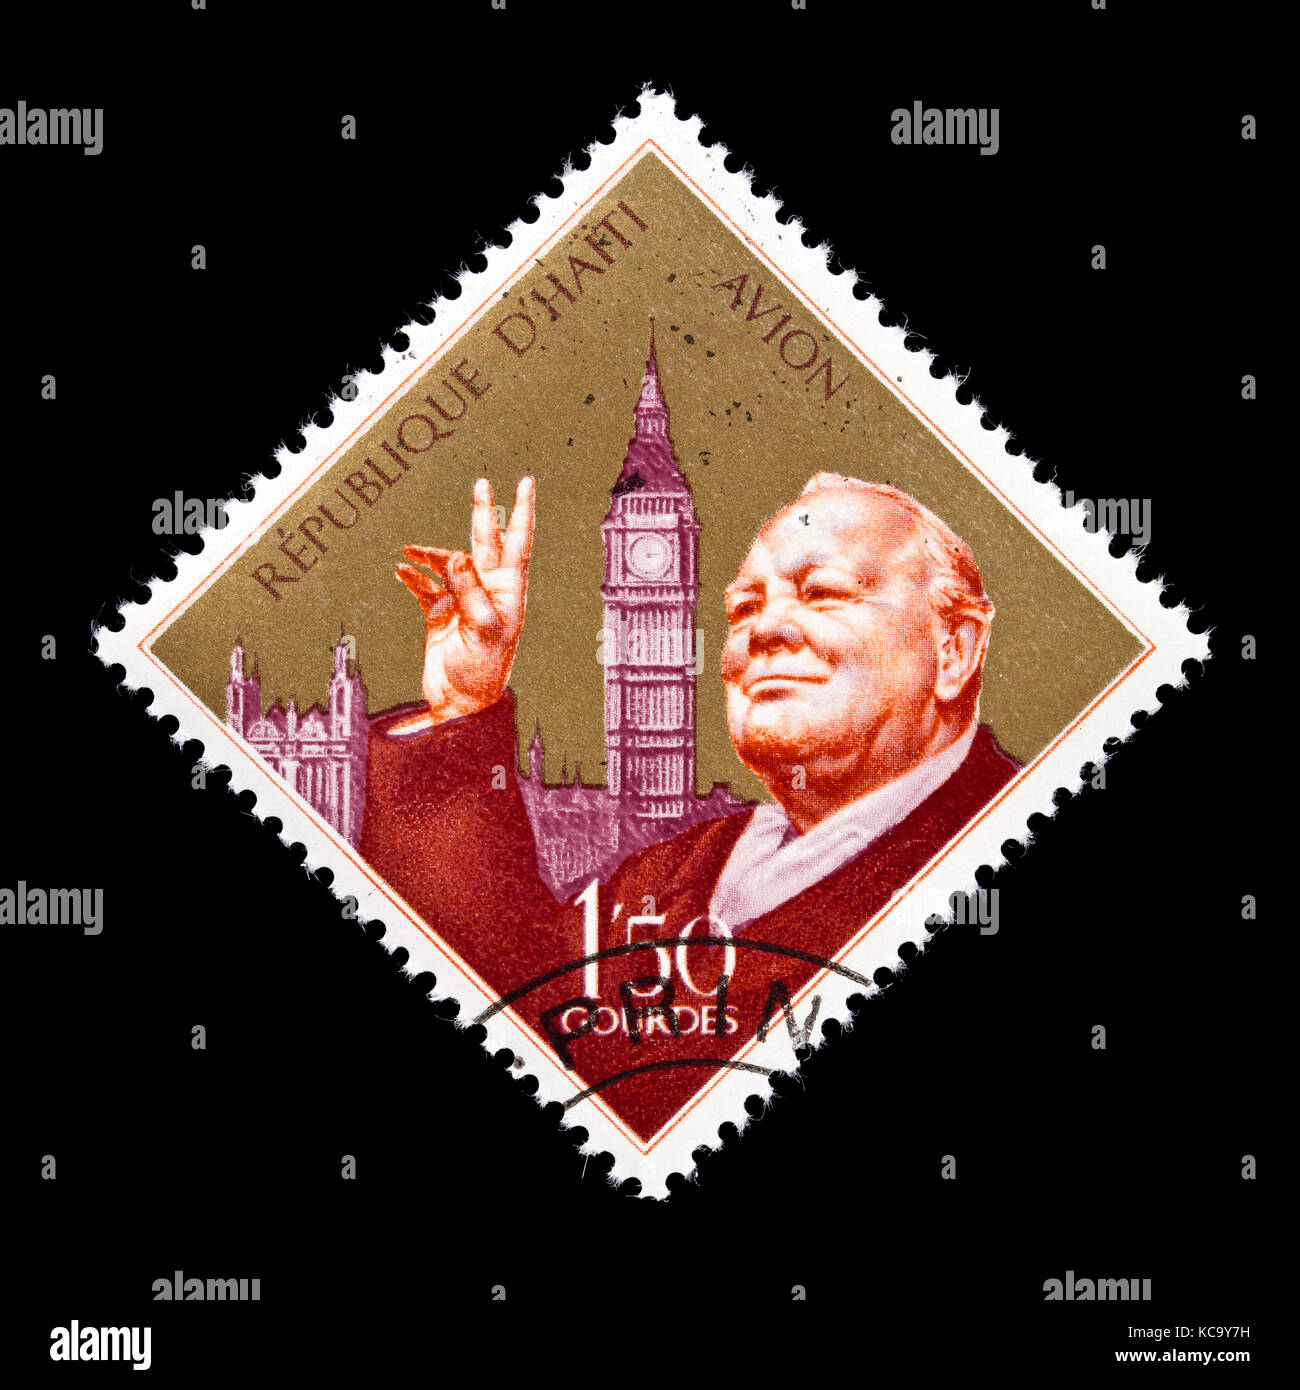 Postage stamp from Haiti depicting Sir Winston Churchill and Big Ben Stock Photo